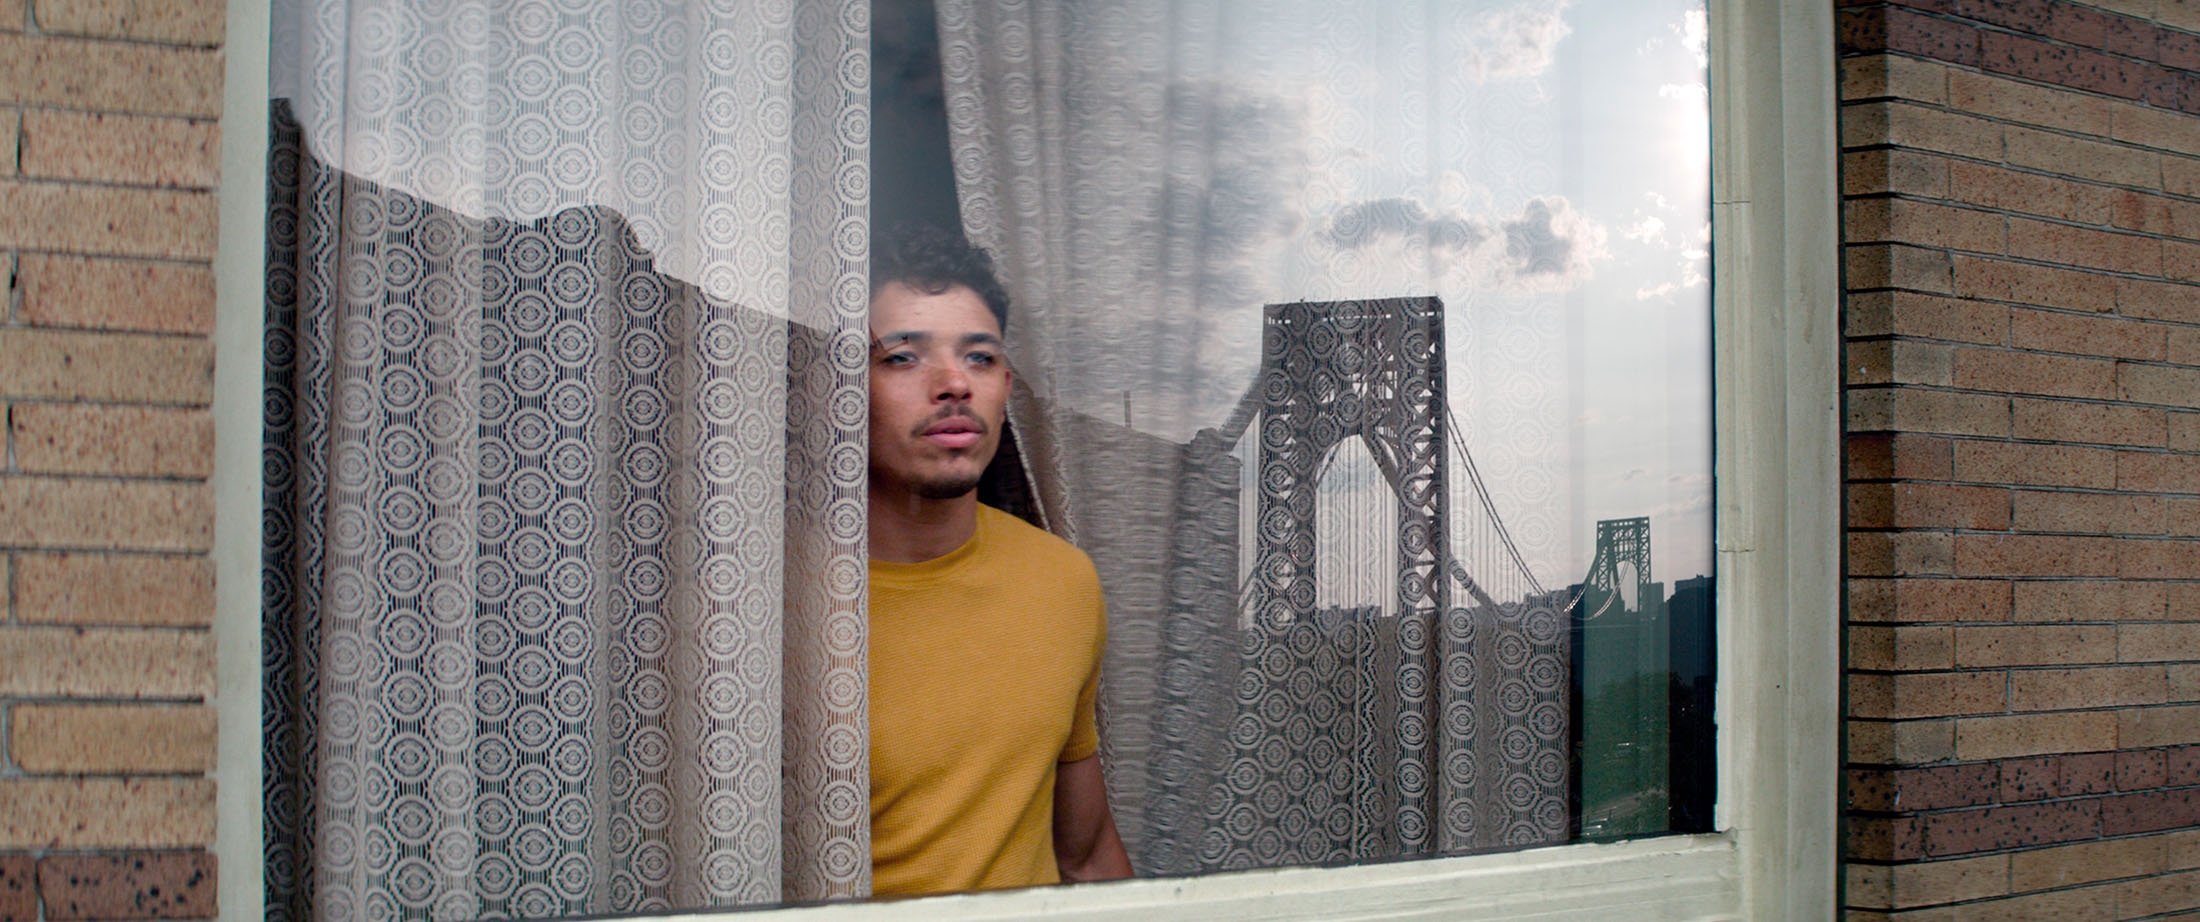 Actor Anthony Ramos looks out of the window with New York